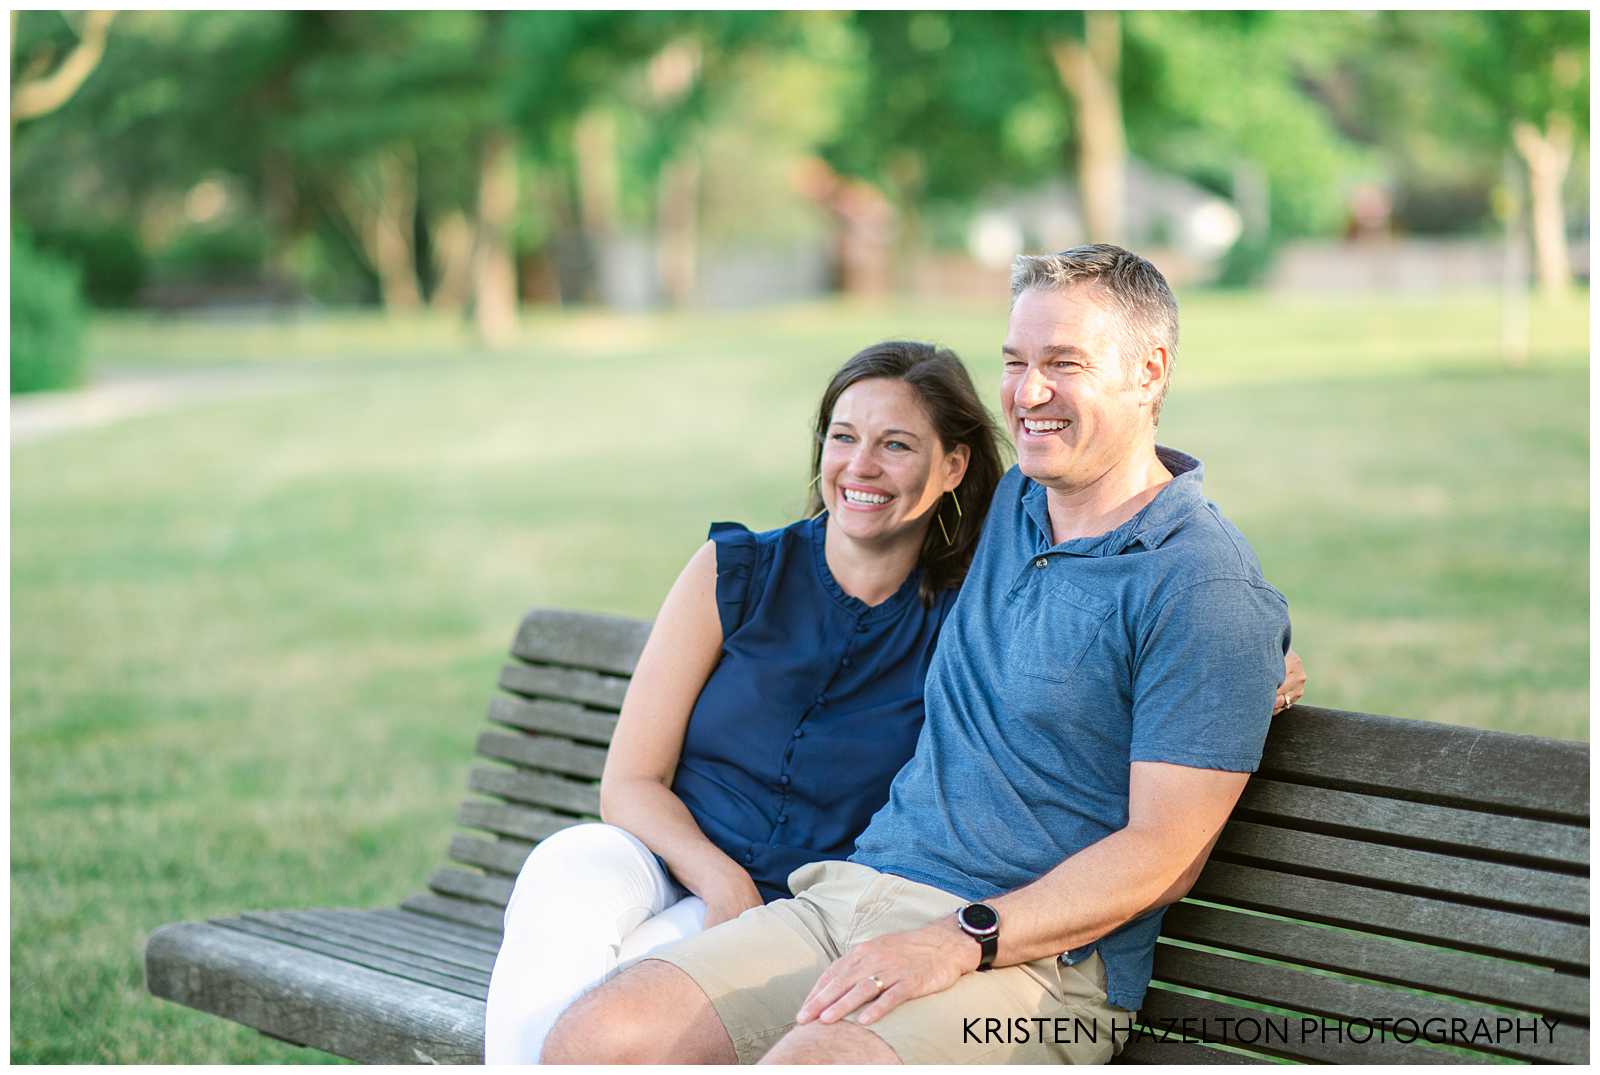 Man and woman wearing blue shirts sitting on a park bench.